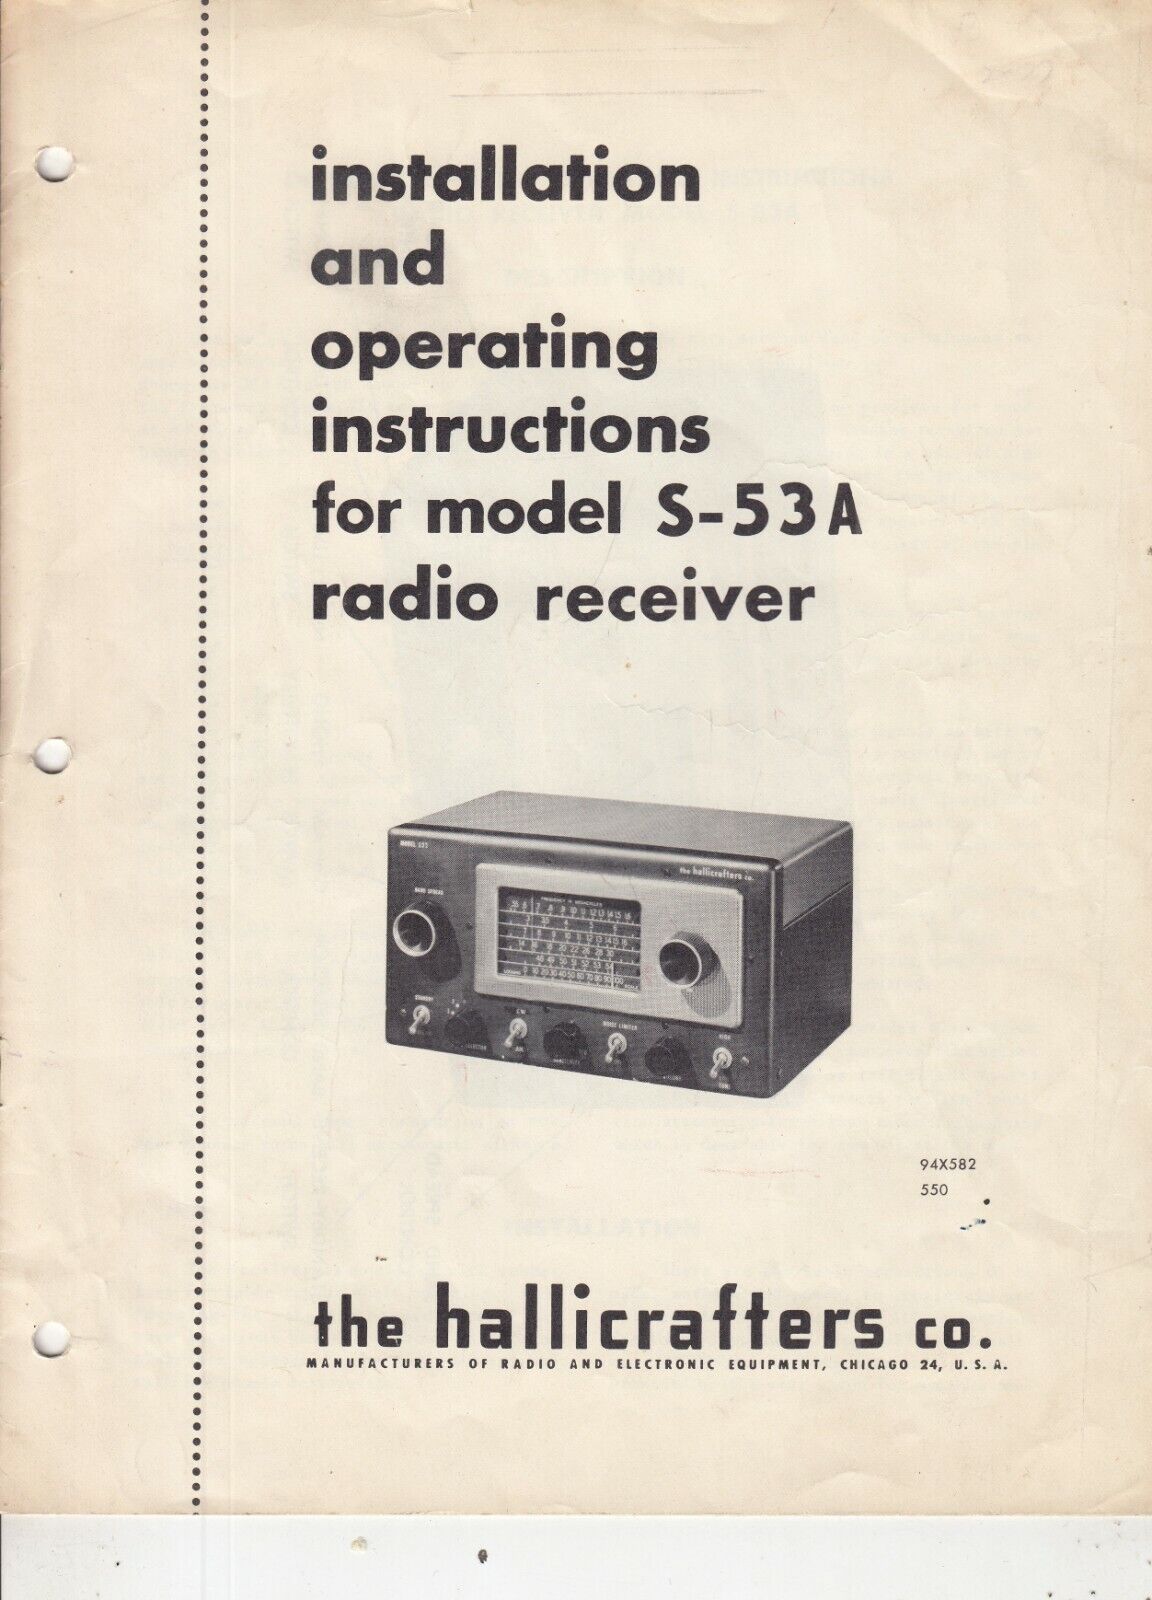 VINTAGE HALLICRAFTERS  Co S-53A  - INSTALLATION + OPERATING INSTRUCTIONS 8 pages